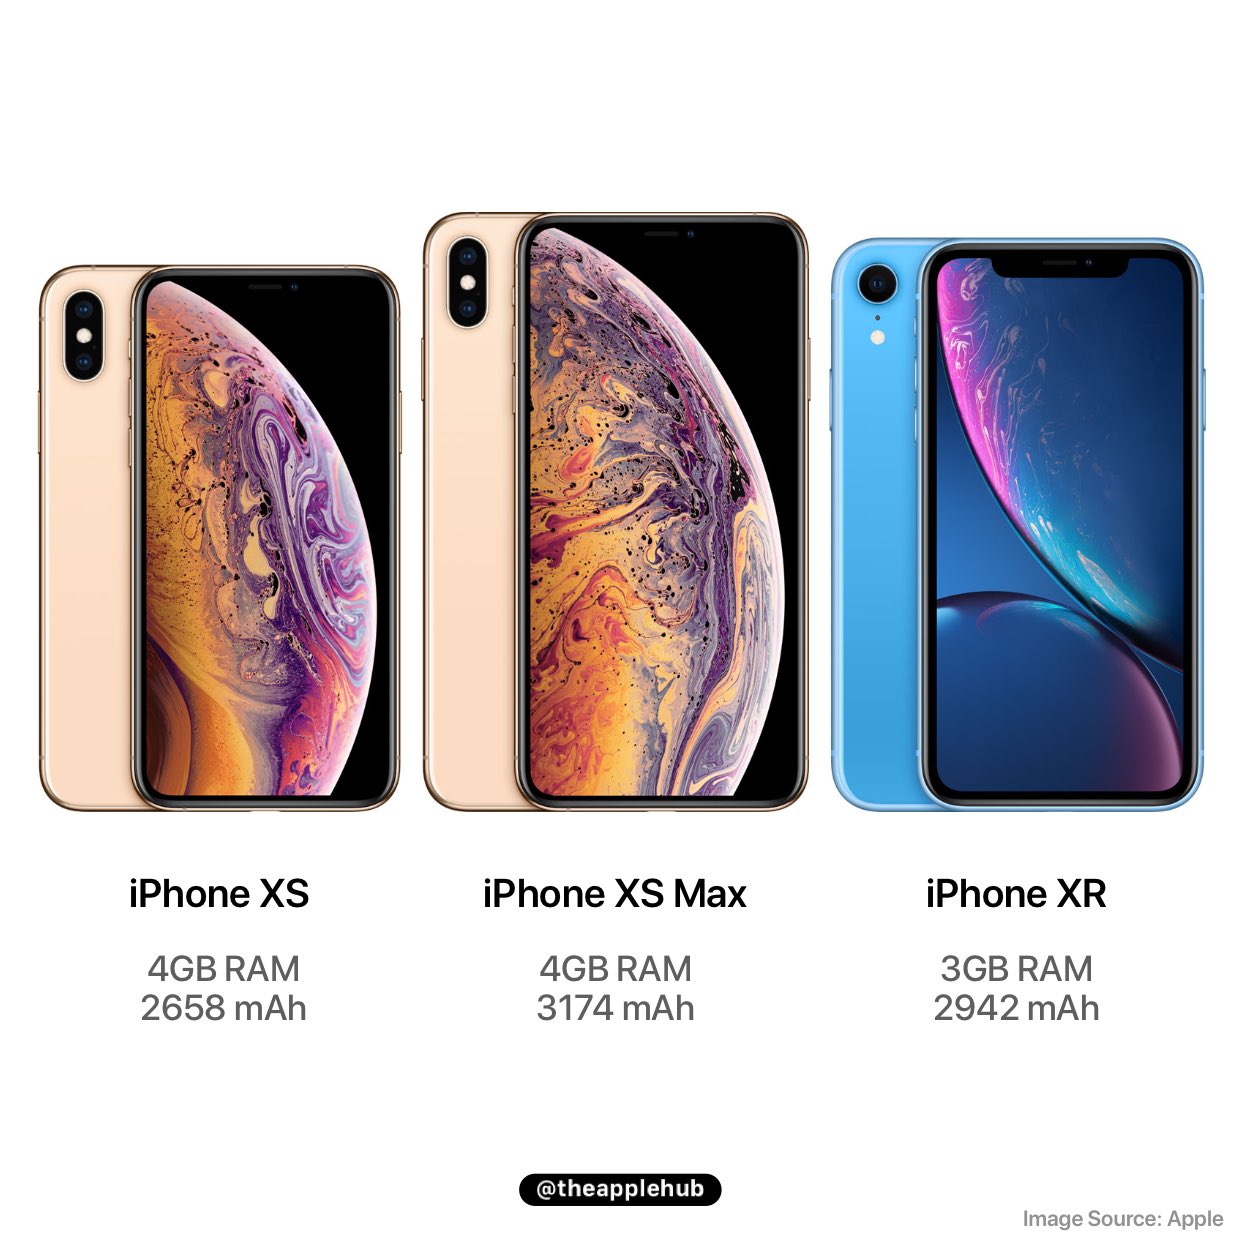 Apple Hub on X: "Full specs including battery capacity and RAM inside the  new iPhones have surfaced in regulatory filings. The iPhone XS and XS Max  both feature 4GB of RAM, XR